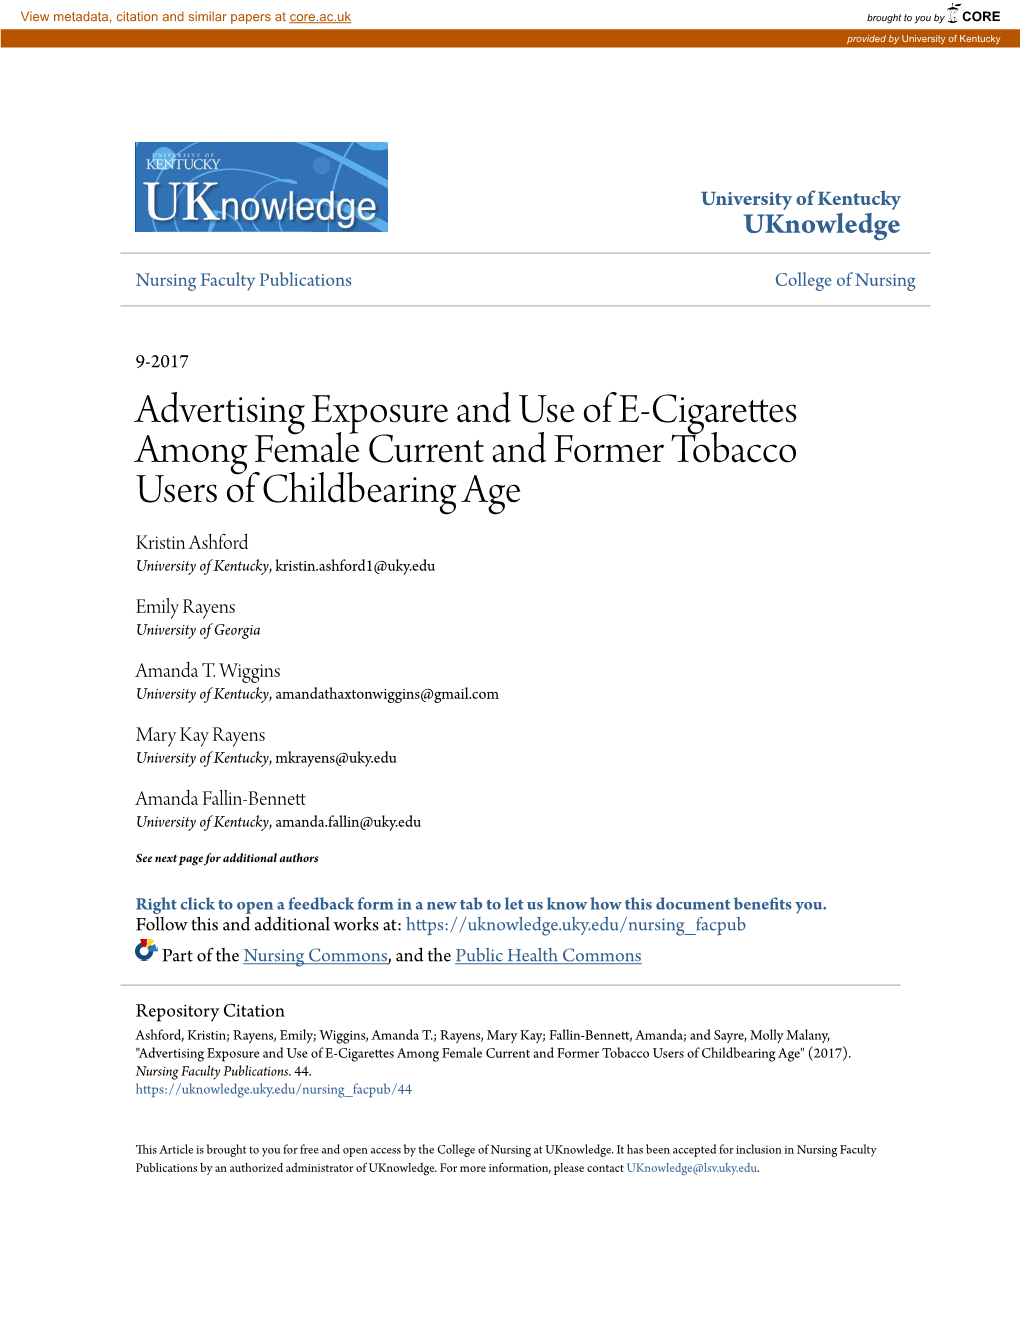 Advertising Exposure and Use of E-Cigarettes Among Female